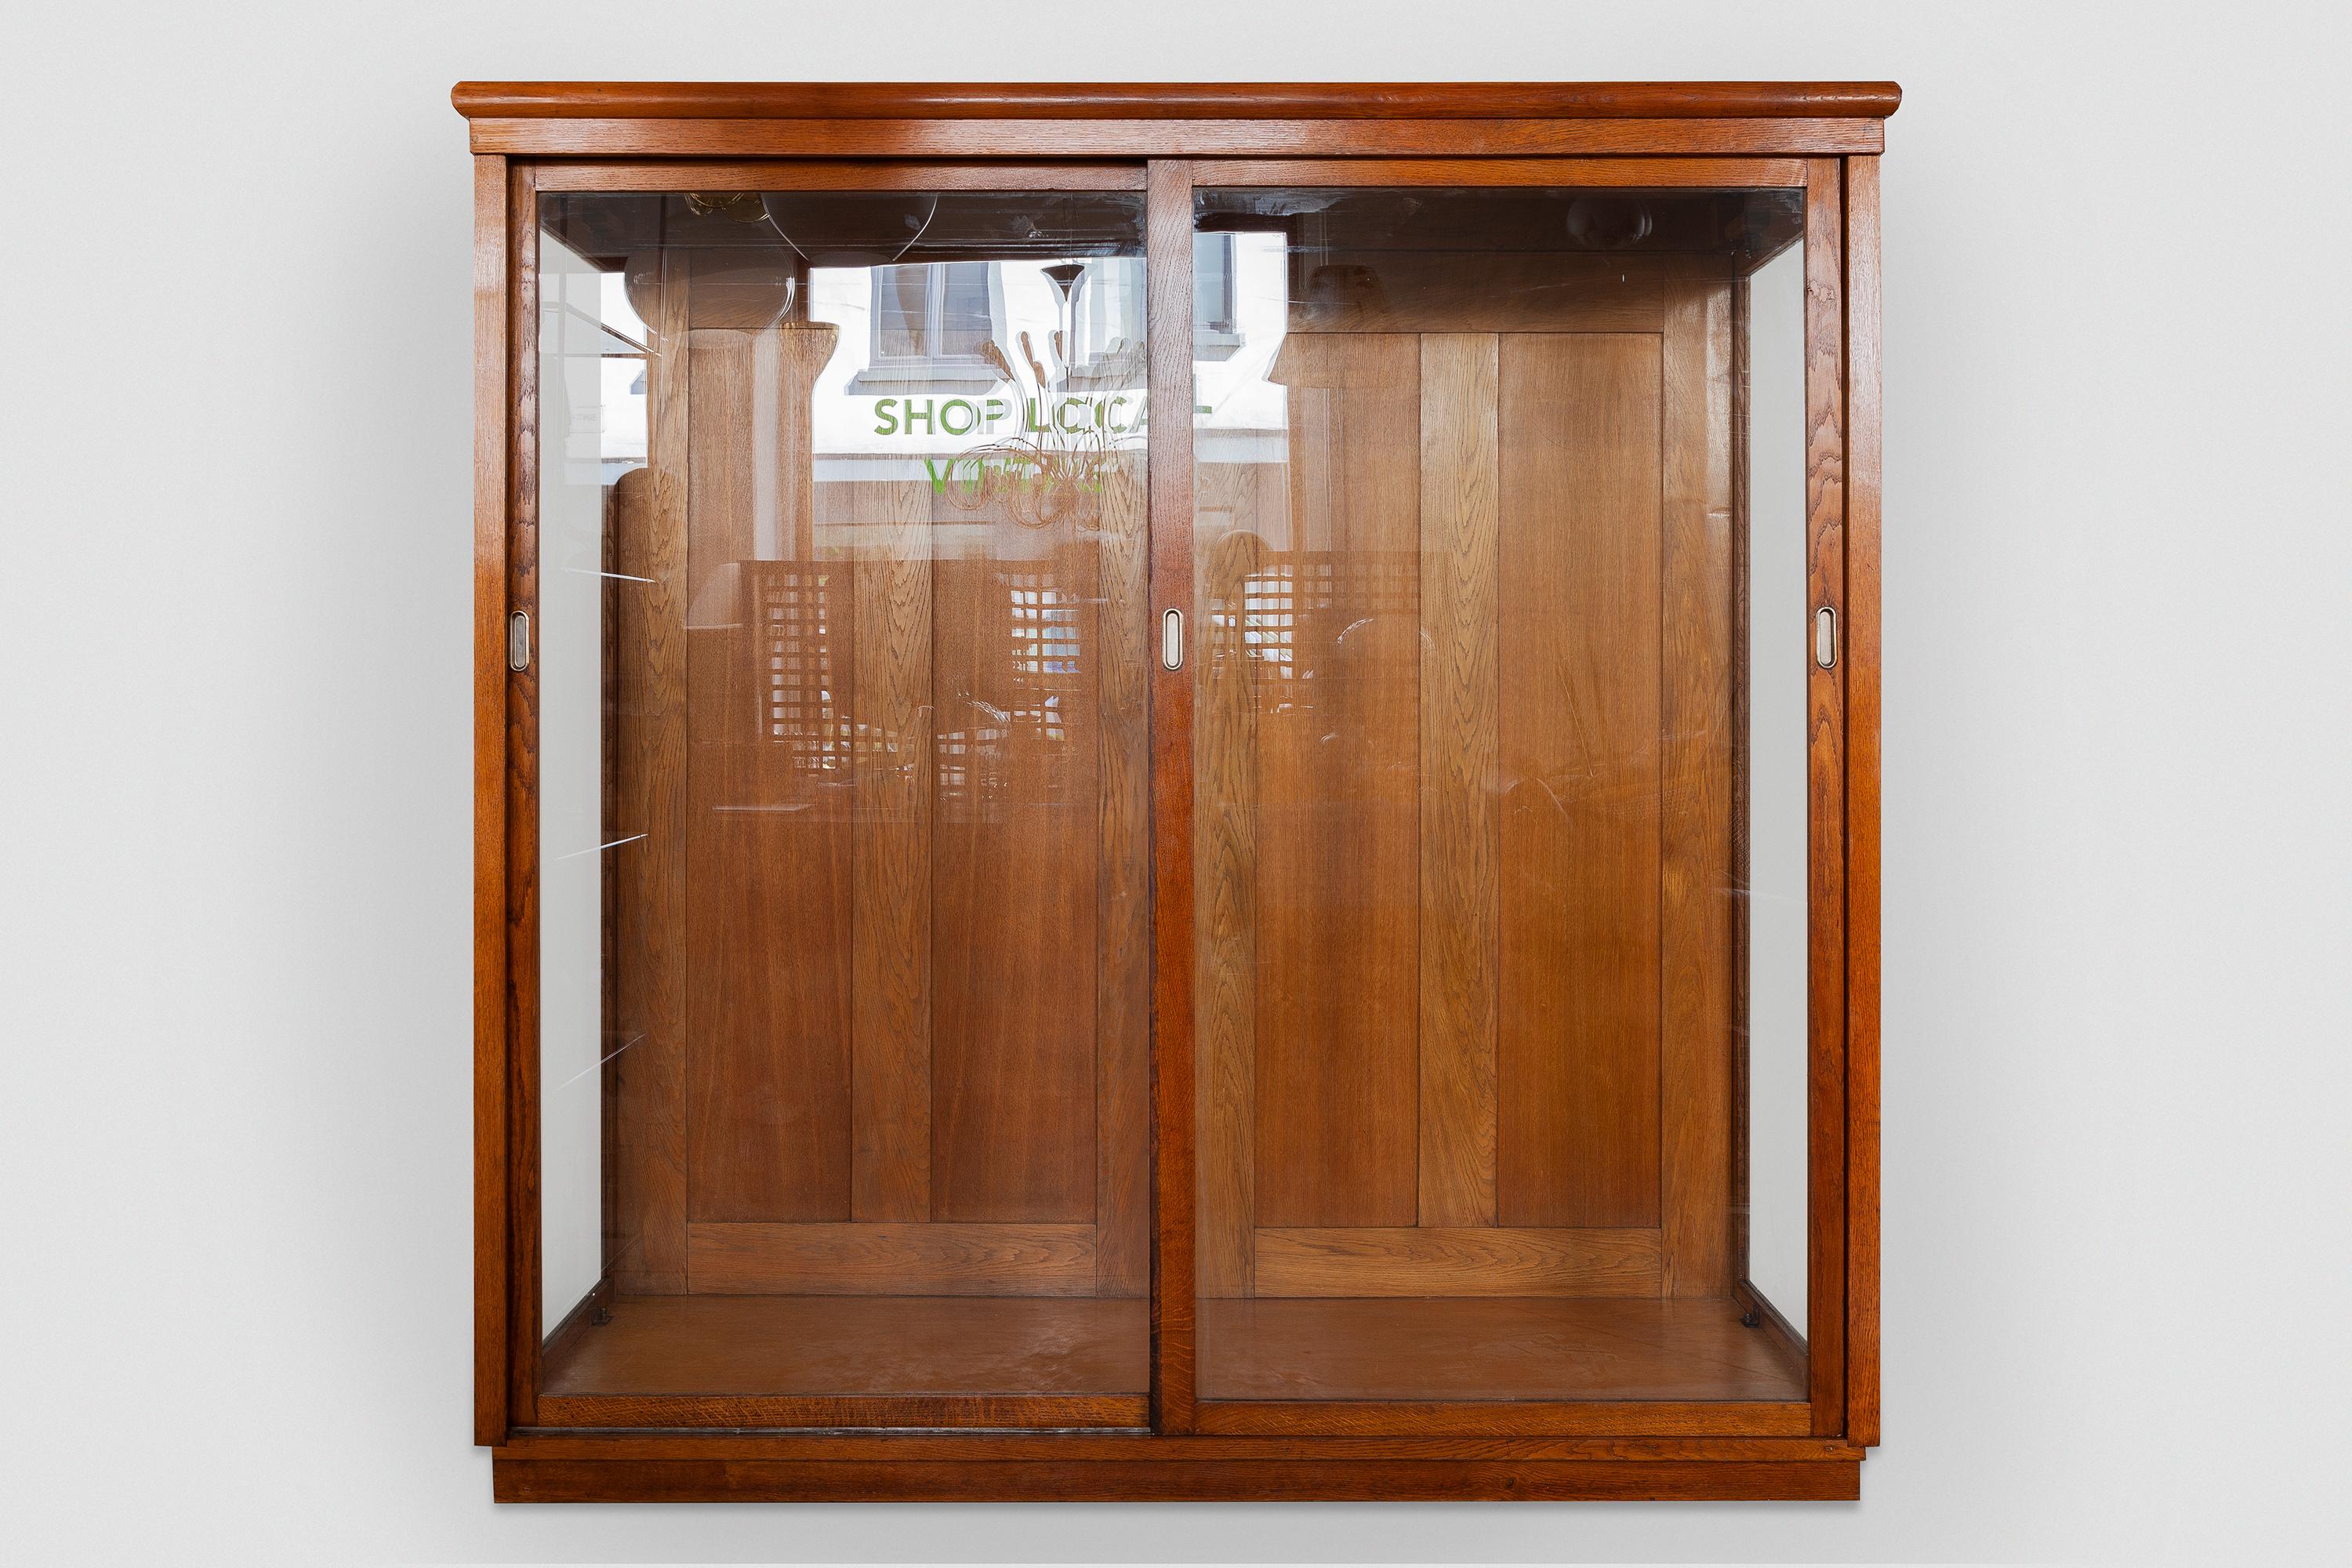 A beautiful Art Deco display cabinet from a former Haute Couture Dress store, suitable for hanging long dresses or coats also very effective for exhibiting your collection in a Wunderkammer setup or for presenting large objects. The furniture is